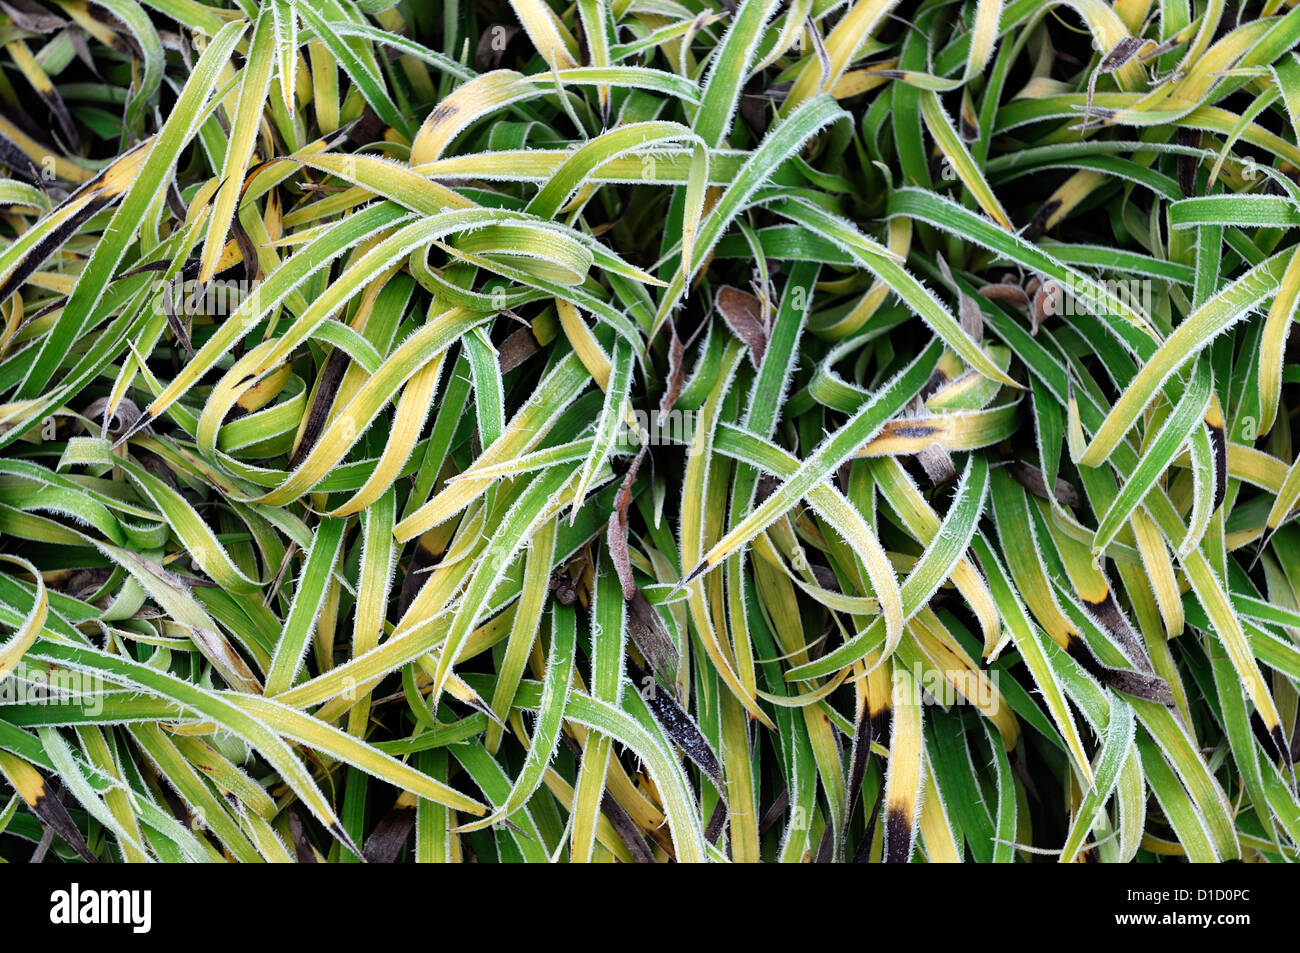 luzula sylvatica aurea ornamental grasses grass foliage leaves plant portraits perennials winter frosted frosty white icy cover Stock Photo